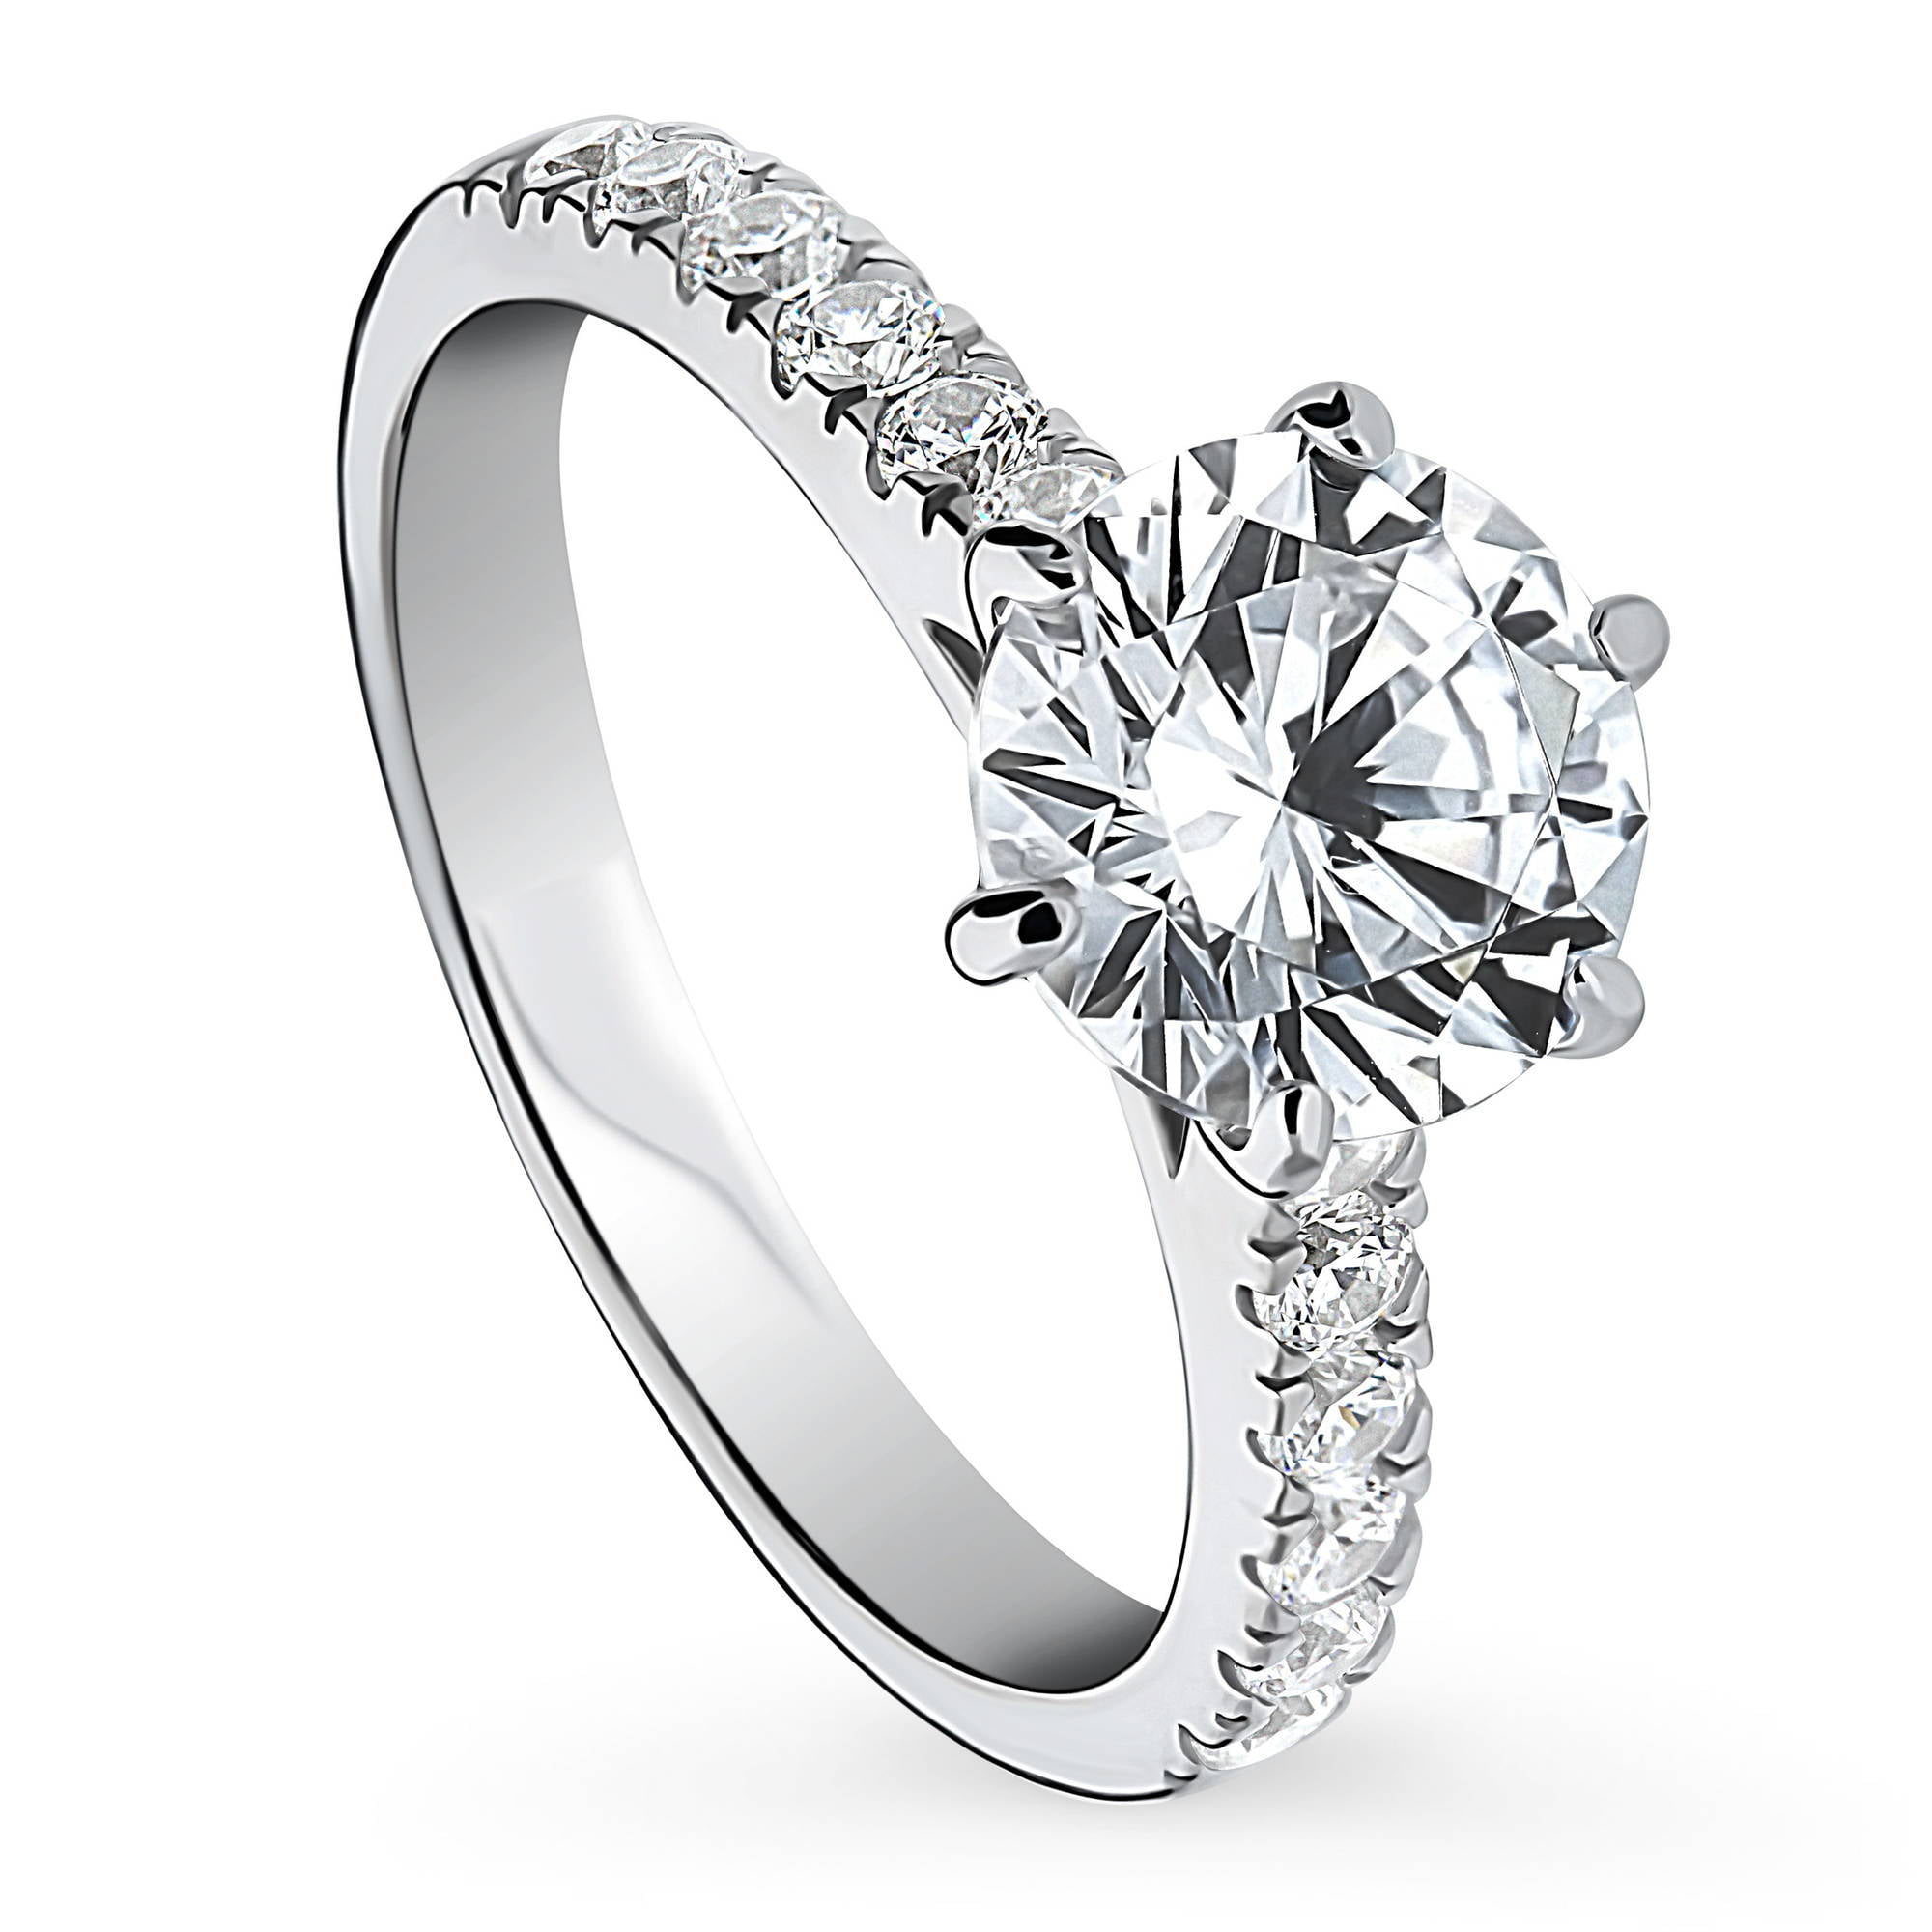 BERRICLE Sterling Silver Round Cubic Zirconia Solitaire Promise Engagement Ring 